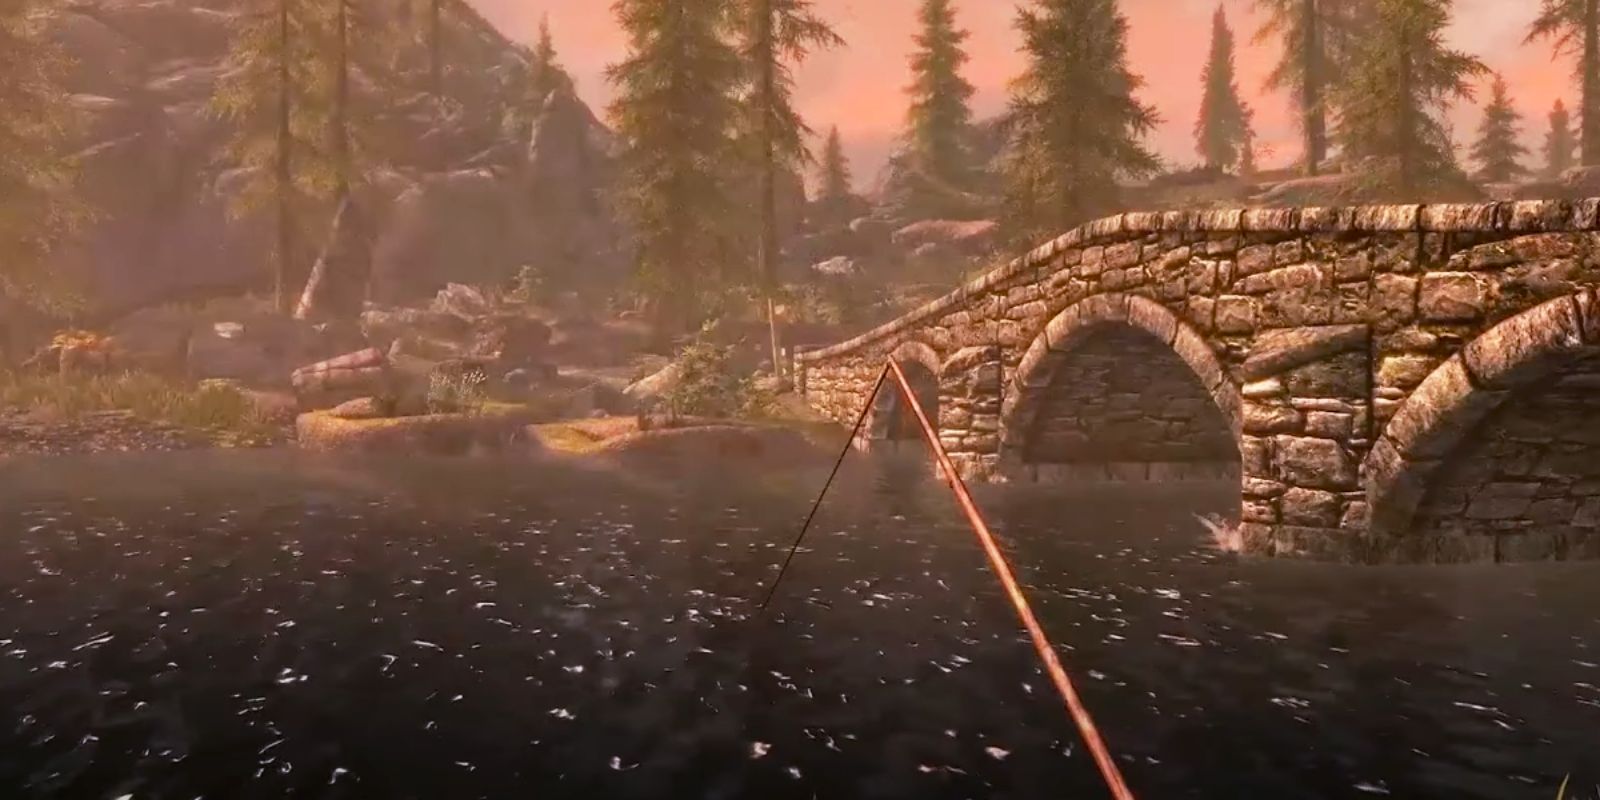 Why Skyrim Is Adding Fishing After 10 Years